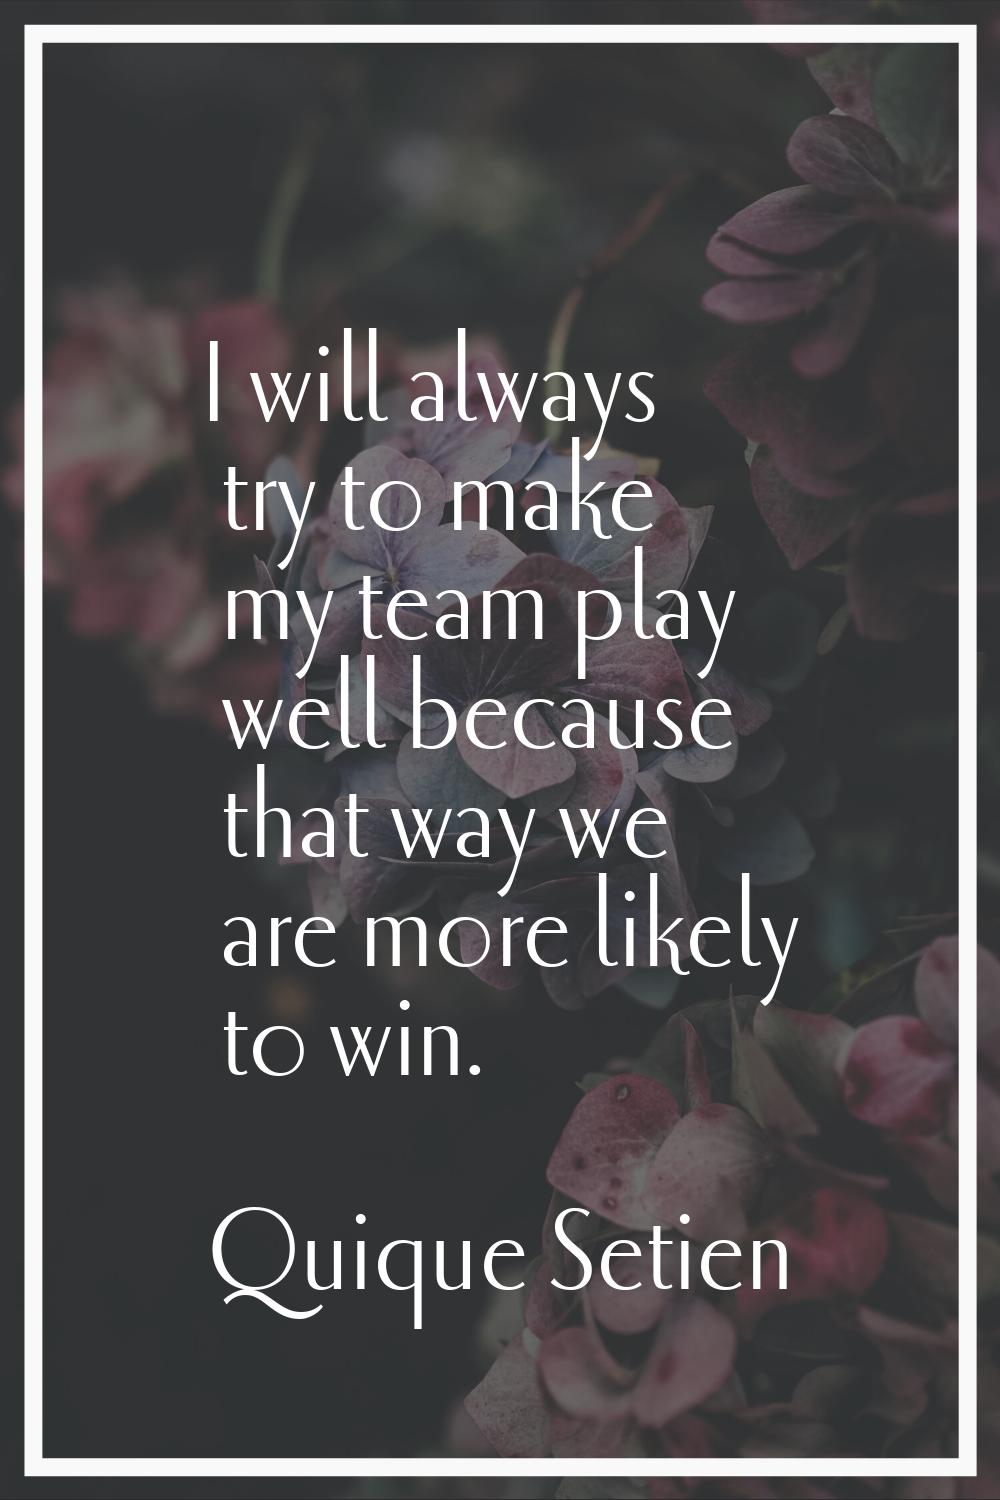 I will always try to make my team play well because that way we are more likely to win.